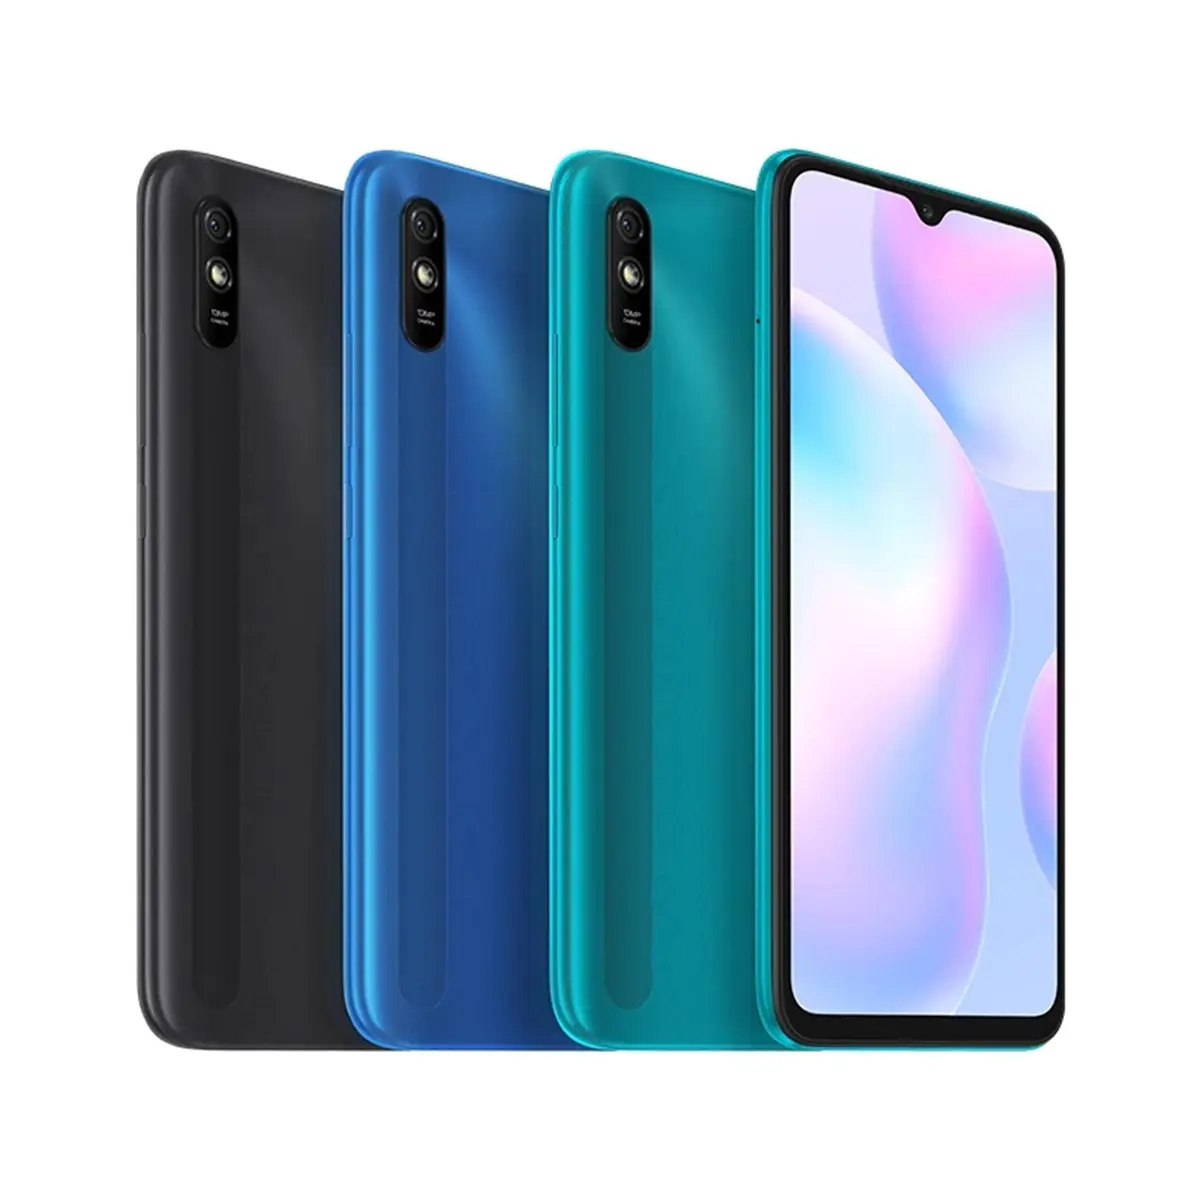 Original Android Cellphone Global Version Unlocked for Xiaomi Redmi 9A 8A 7A 6A 5A Smart Mobile Phone